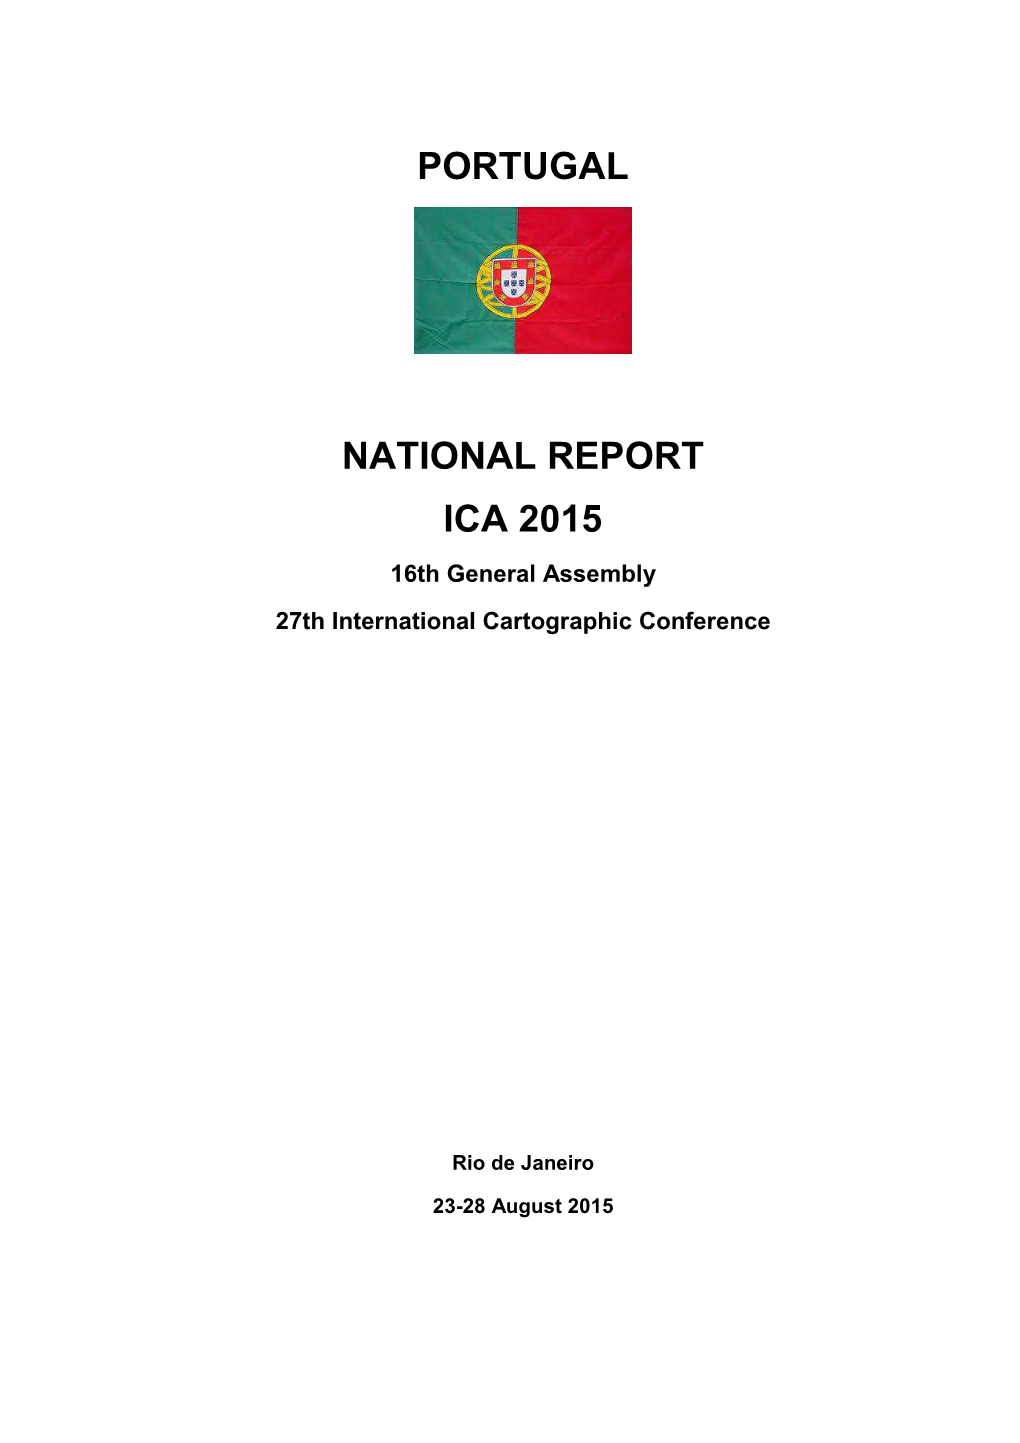 PORTUGAL National Report ICA 2015